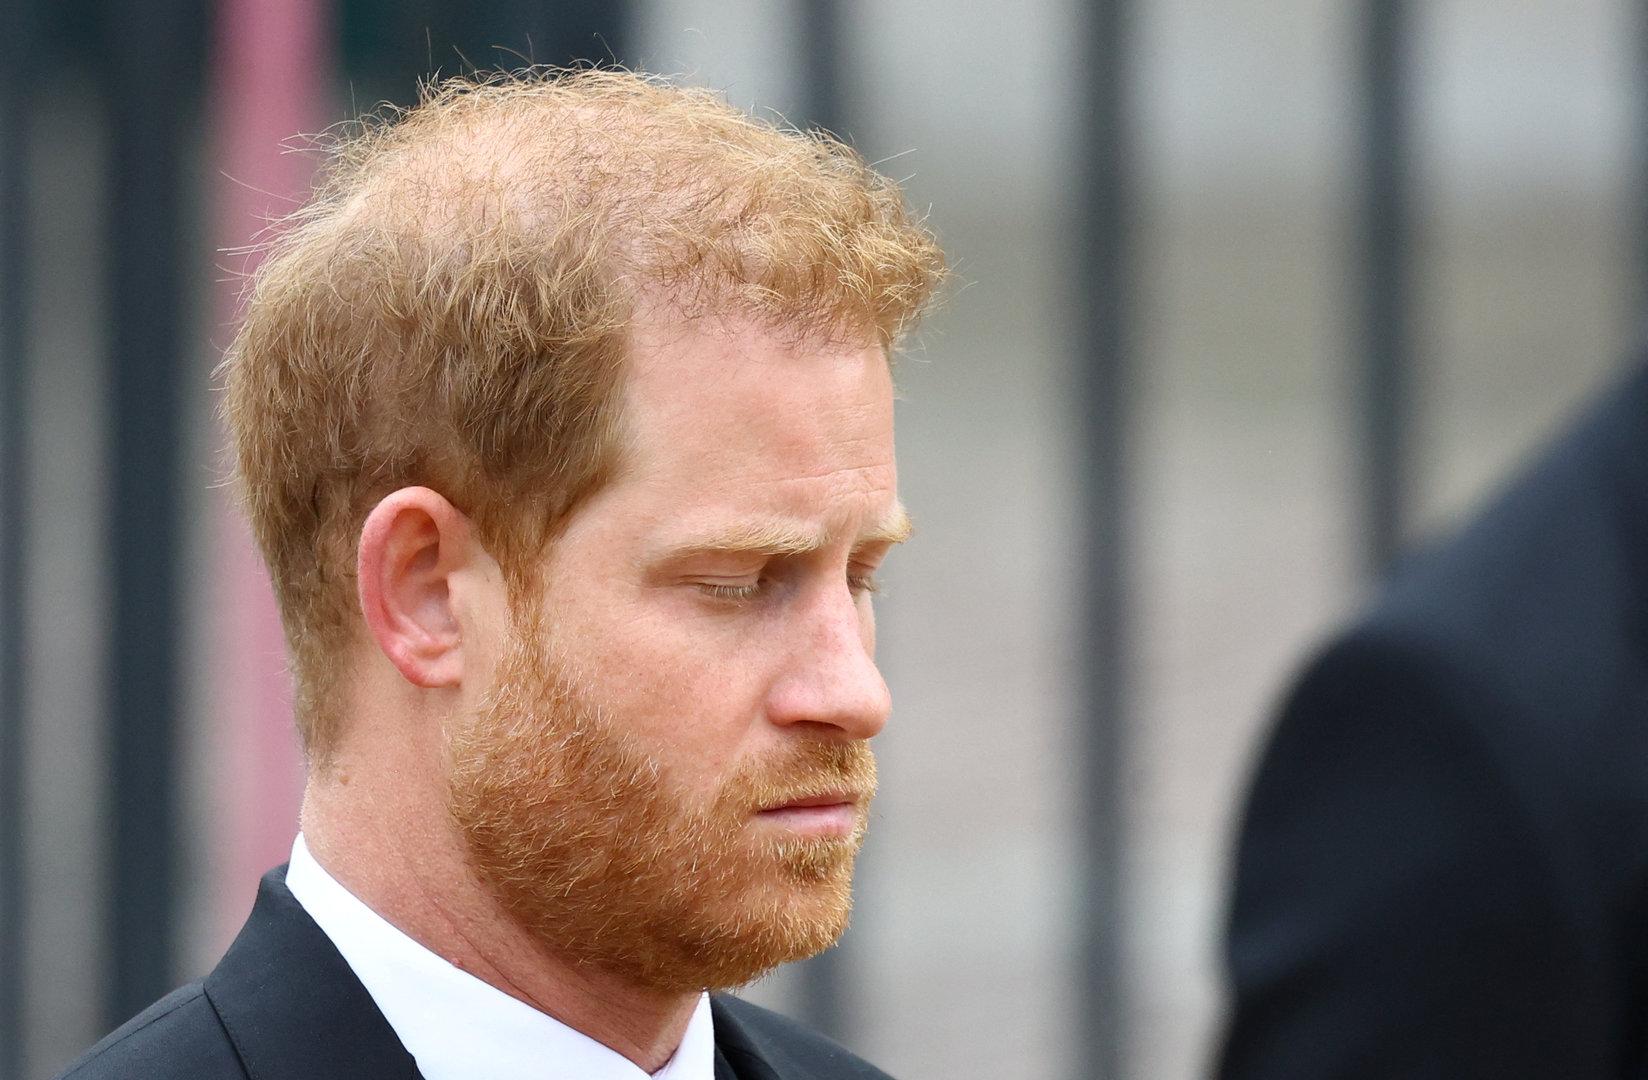 Prince Harry takes stock: “I've lost a lot”